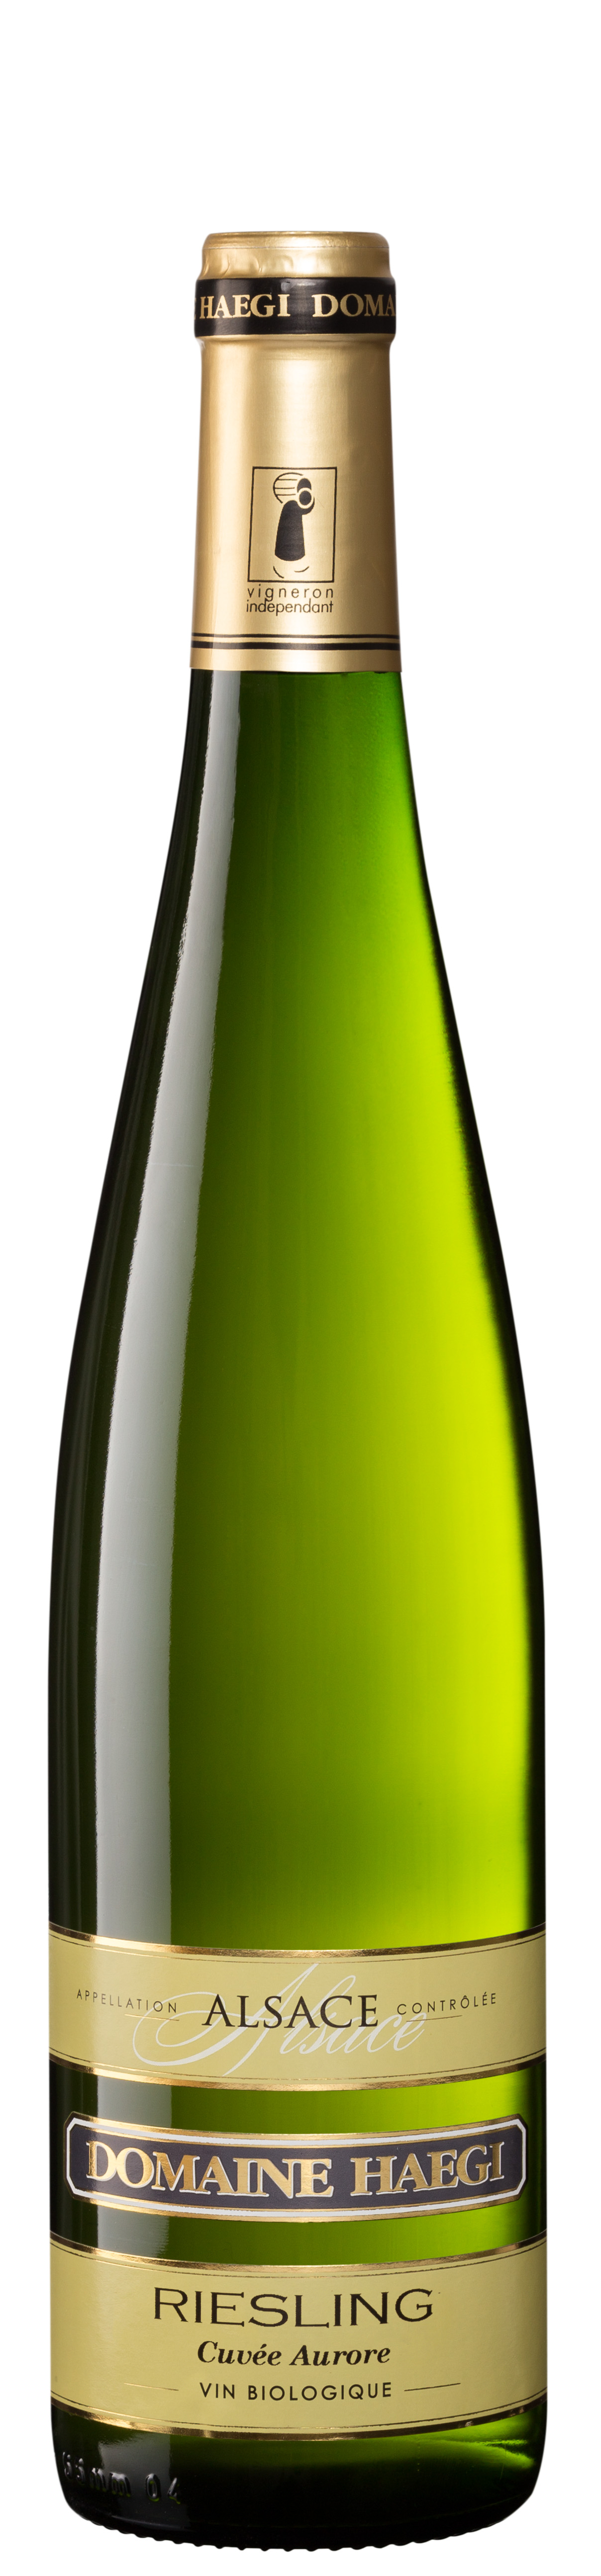 Riesling Cuveé Aurore 2016